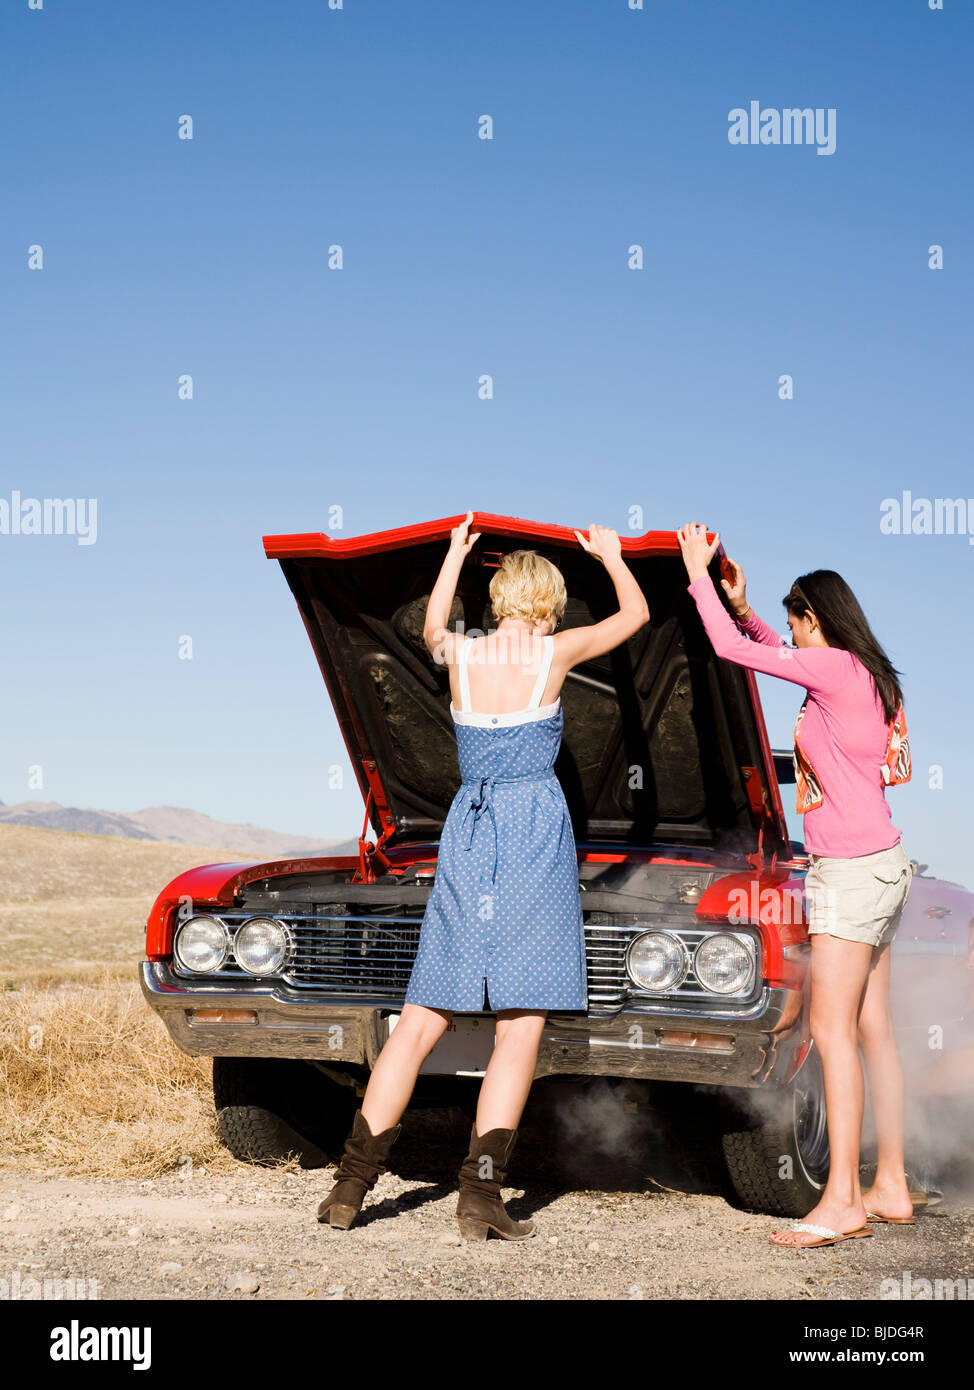 two women with car trouble. Stock Photo